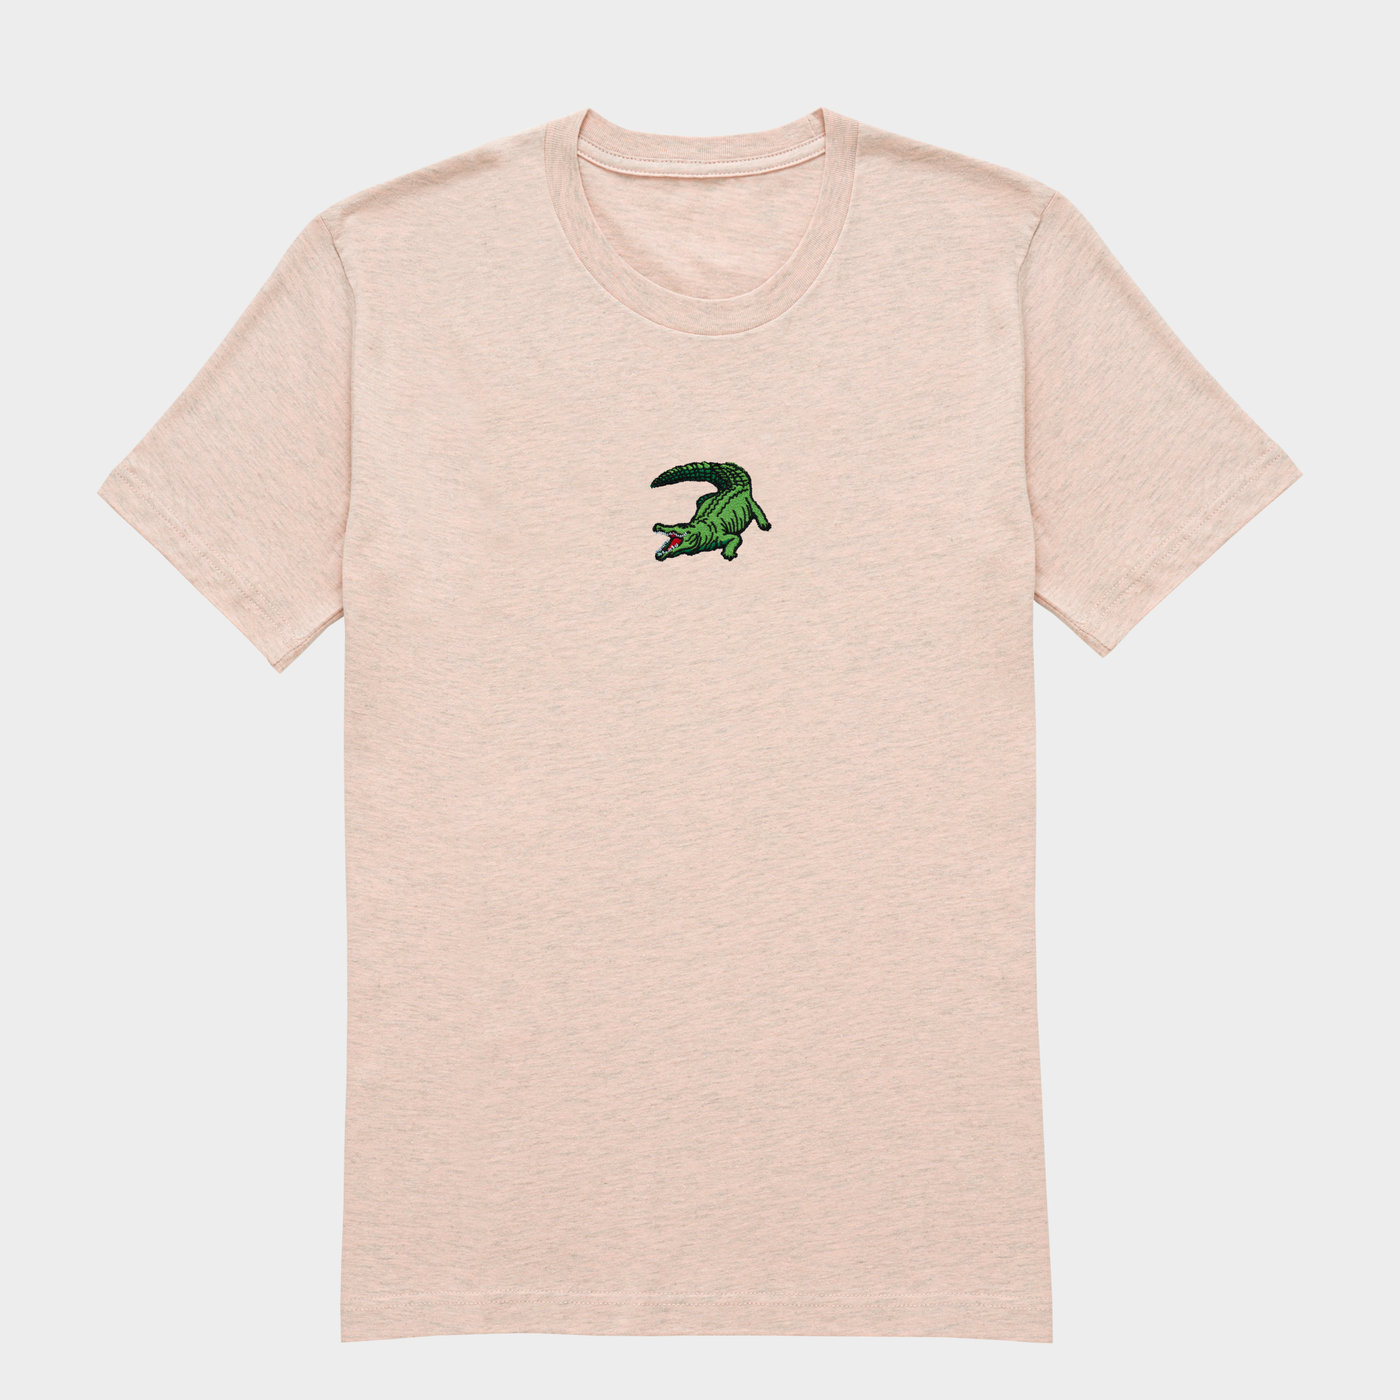 Bobby's Planet Women's Embroidered Saltwater Crocodile T-Shirt from Australia Down Under Animals Collection in Heather Prism Peach Color#color_heather-prism-peach